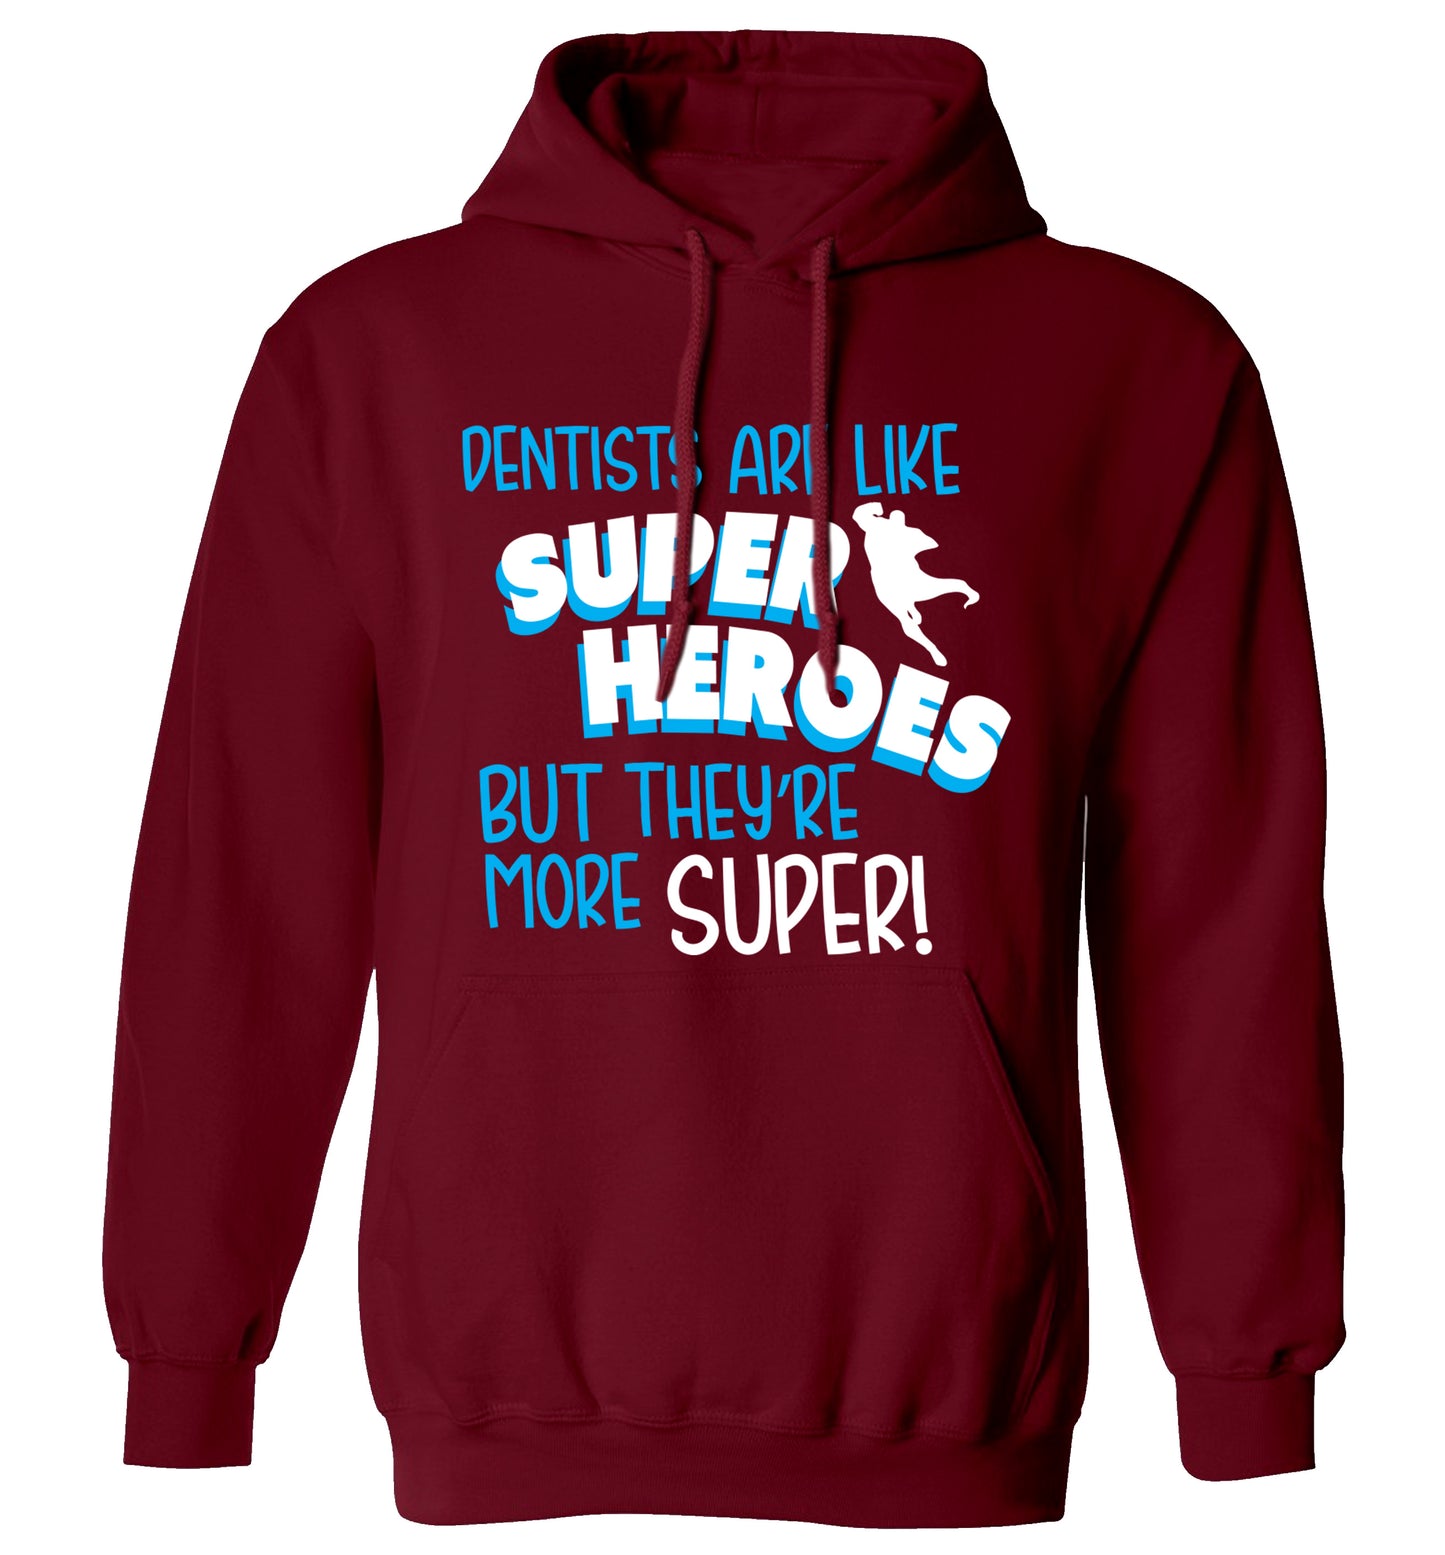 Dentists are like superheros but they're more super adults unisex maroon hoodie 2XL